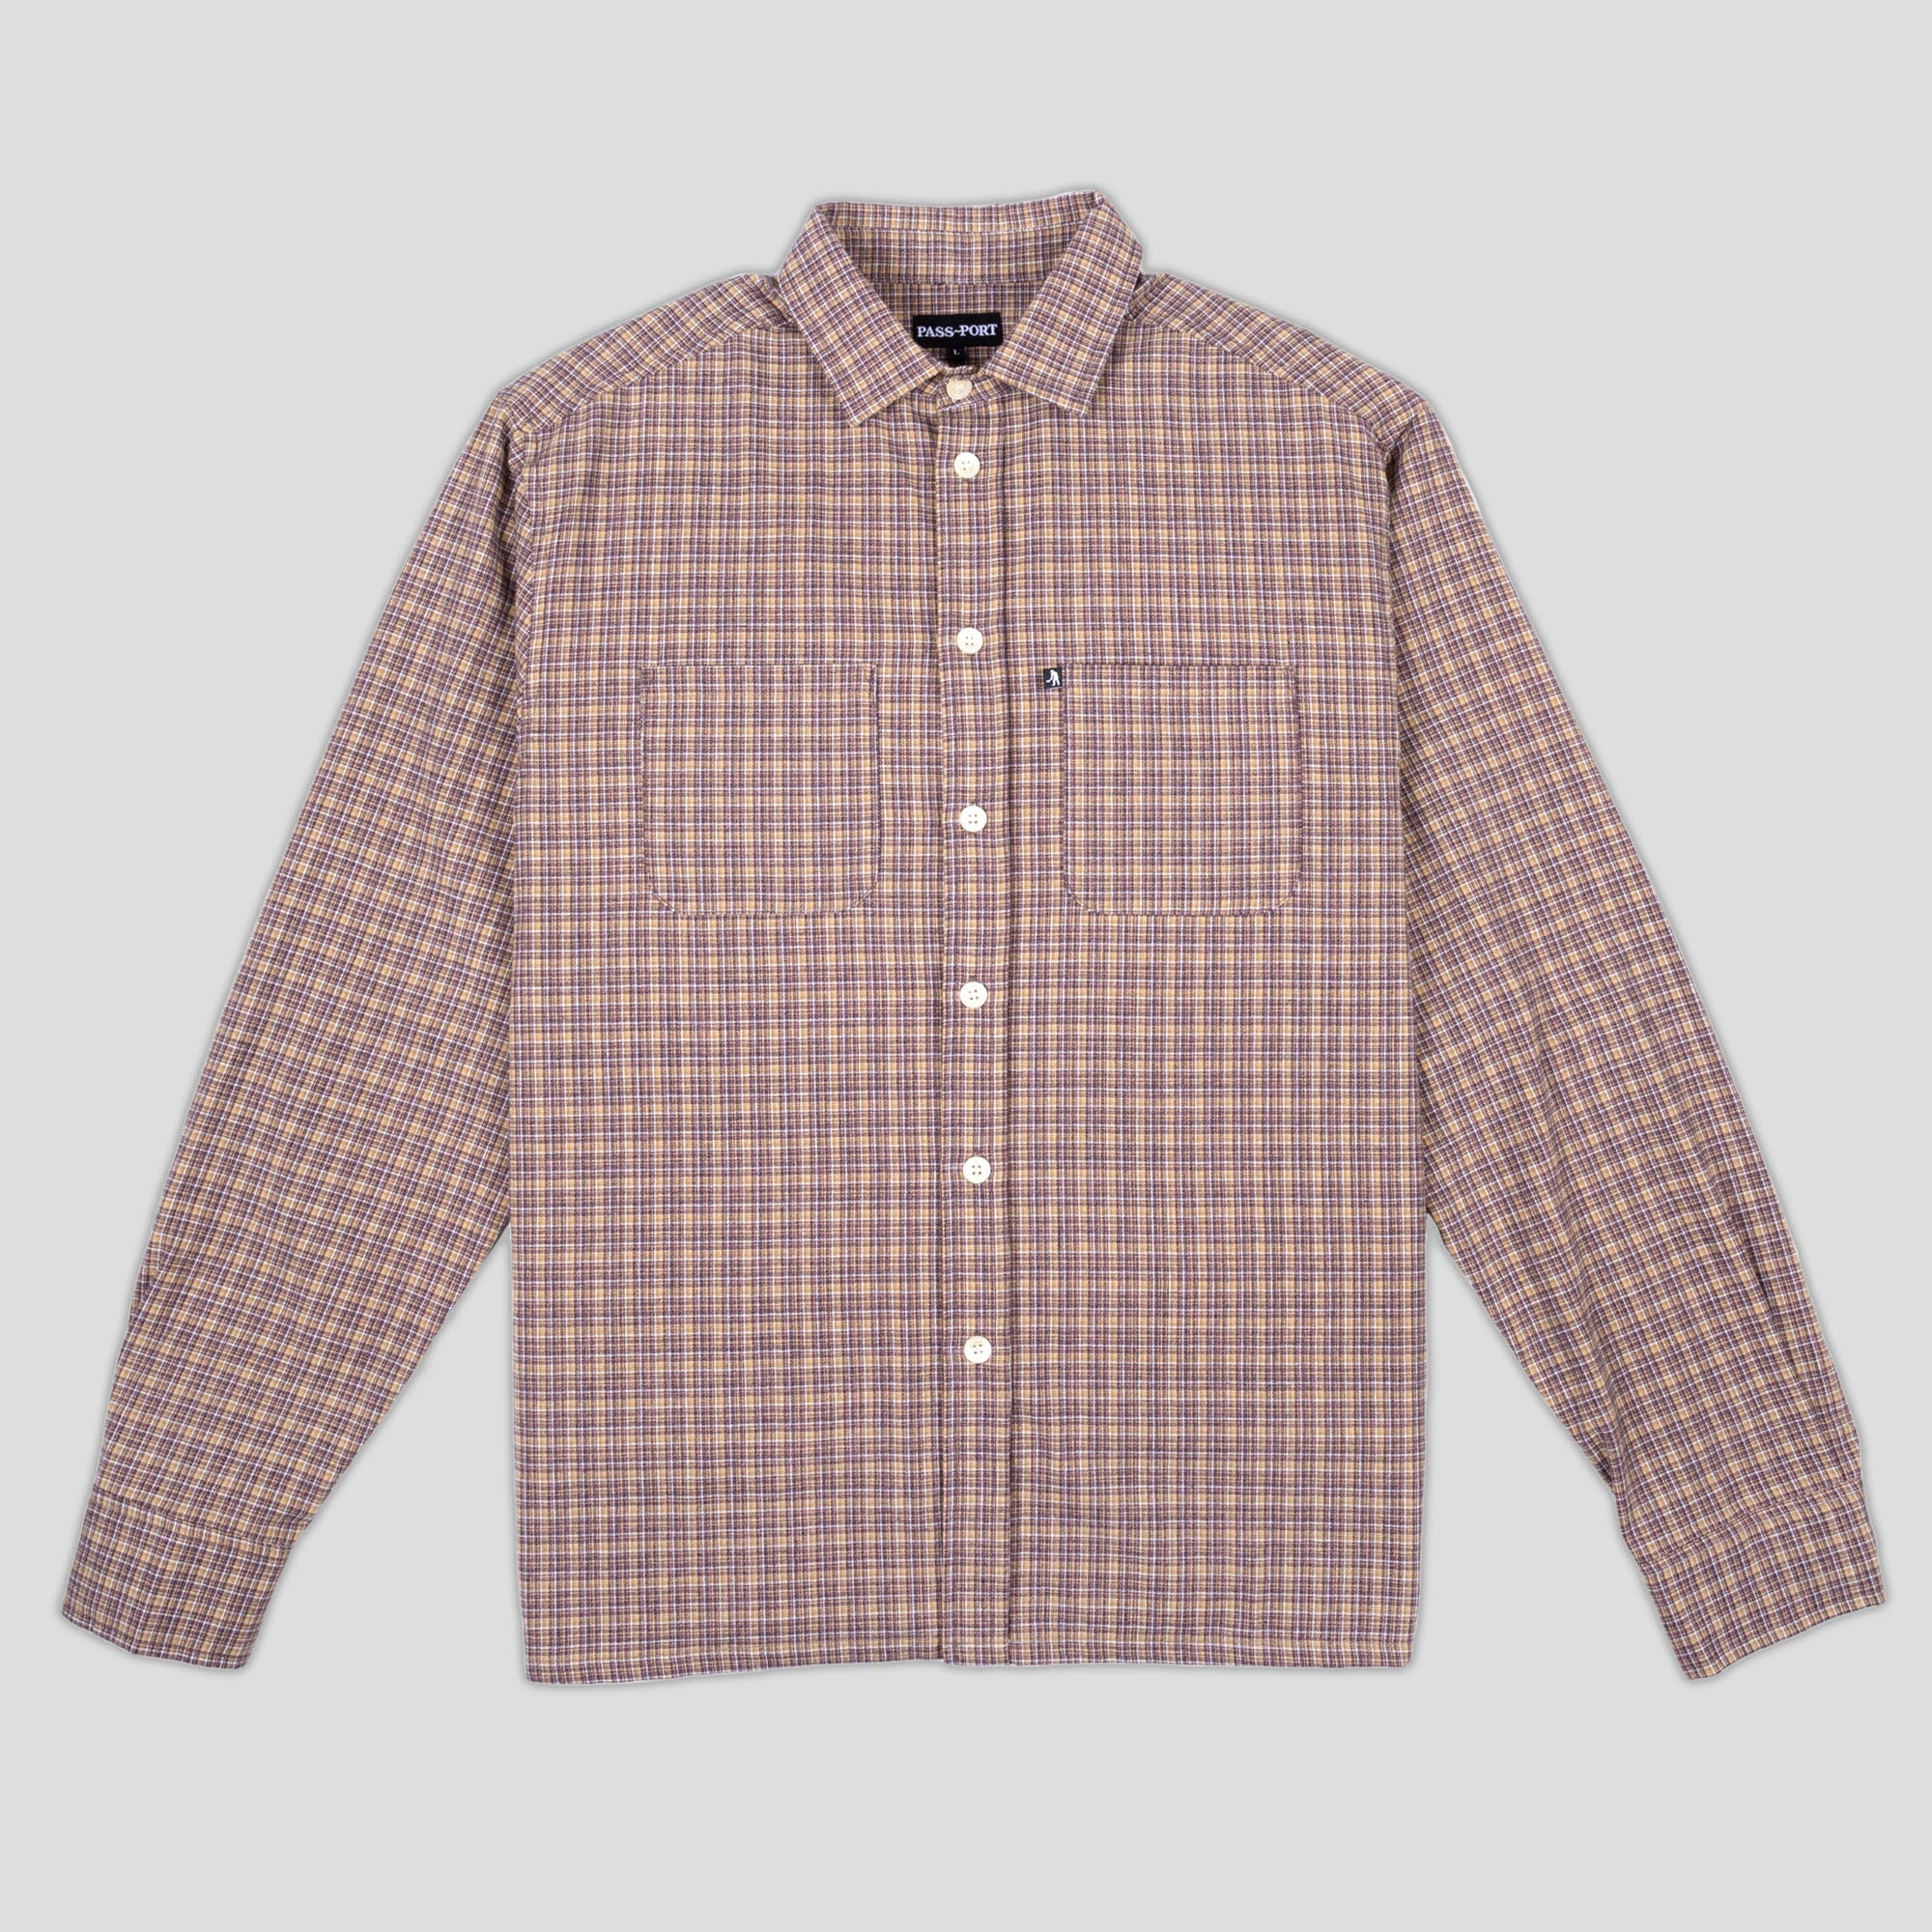 Pass~Port Workers Check Long-sleeve Shirt - Honeycomb